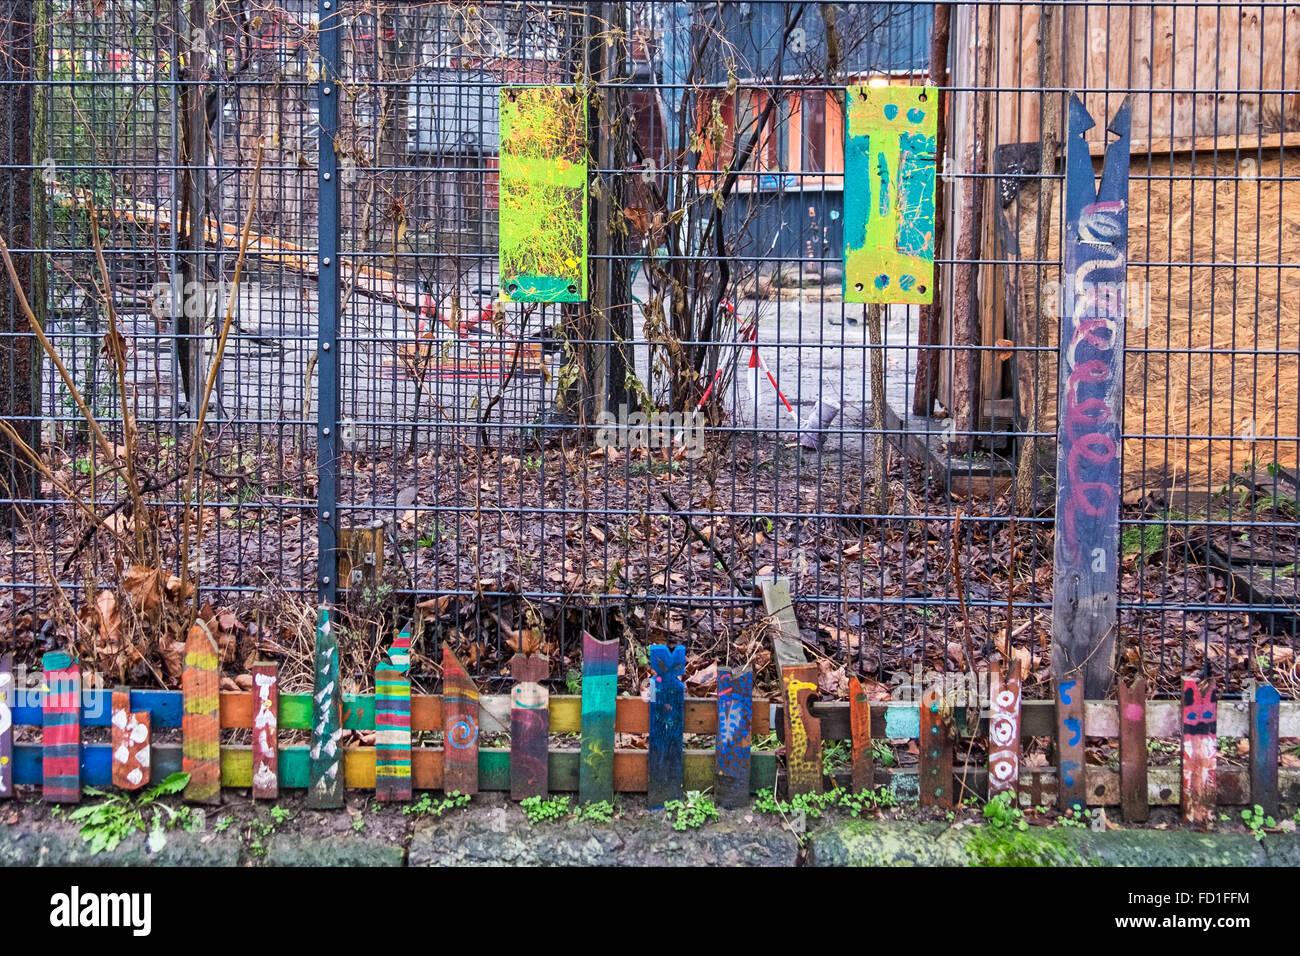 Berlin Kolle 37 spielplatz, Chikdren's playground with colourful hand painted decorated fence Stock Photo